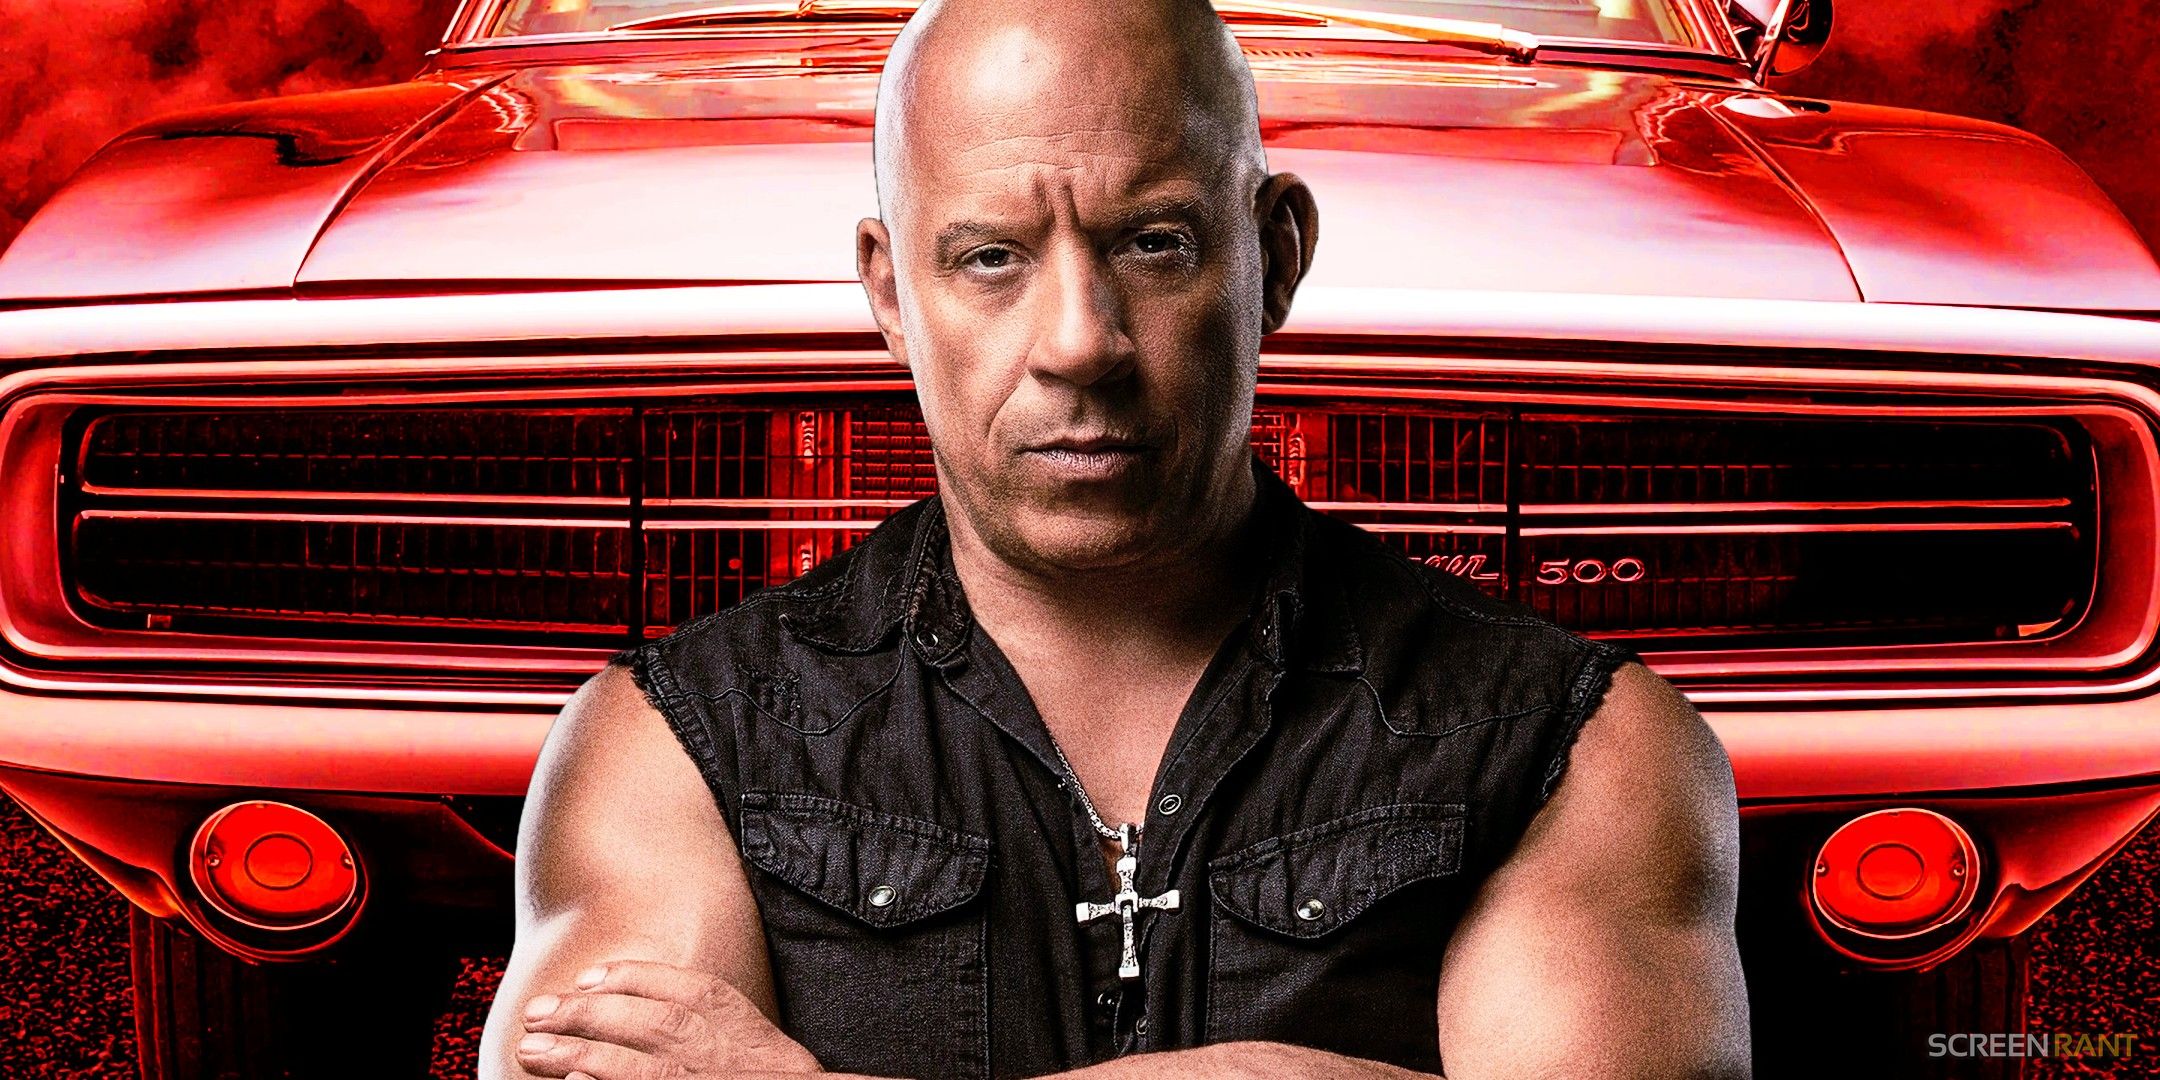 Vin Diesel as Dominic Toretto standing in front of a car in Fast & Furious